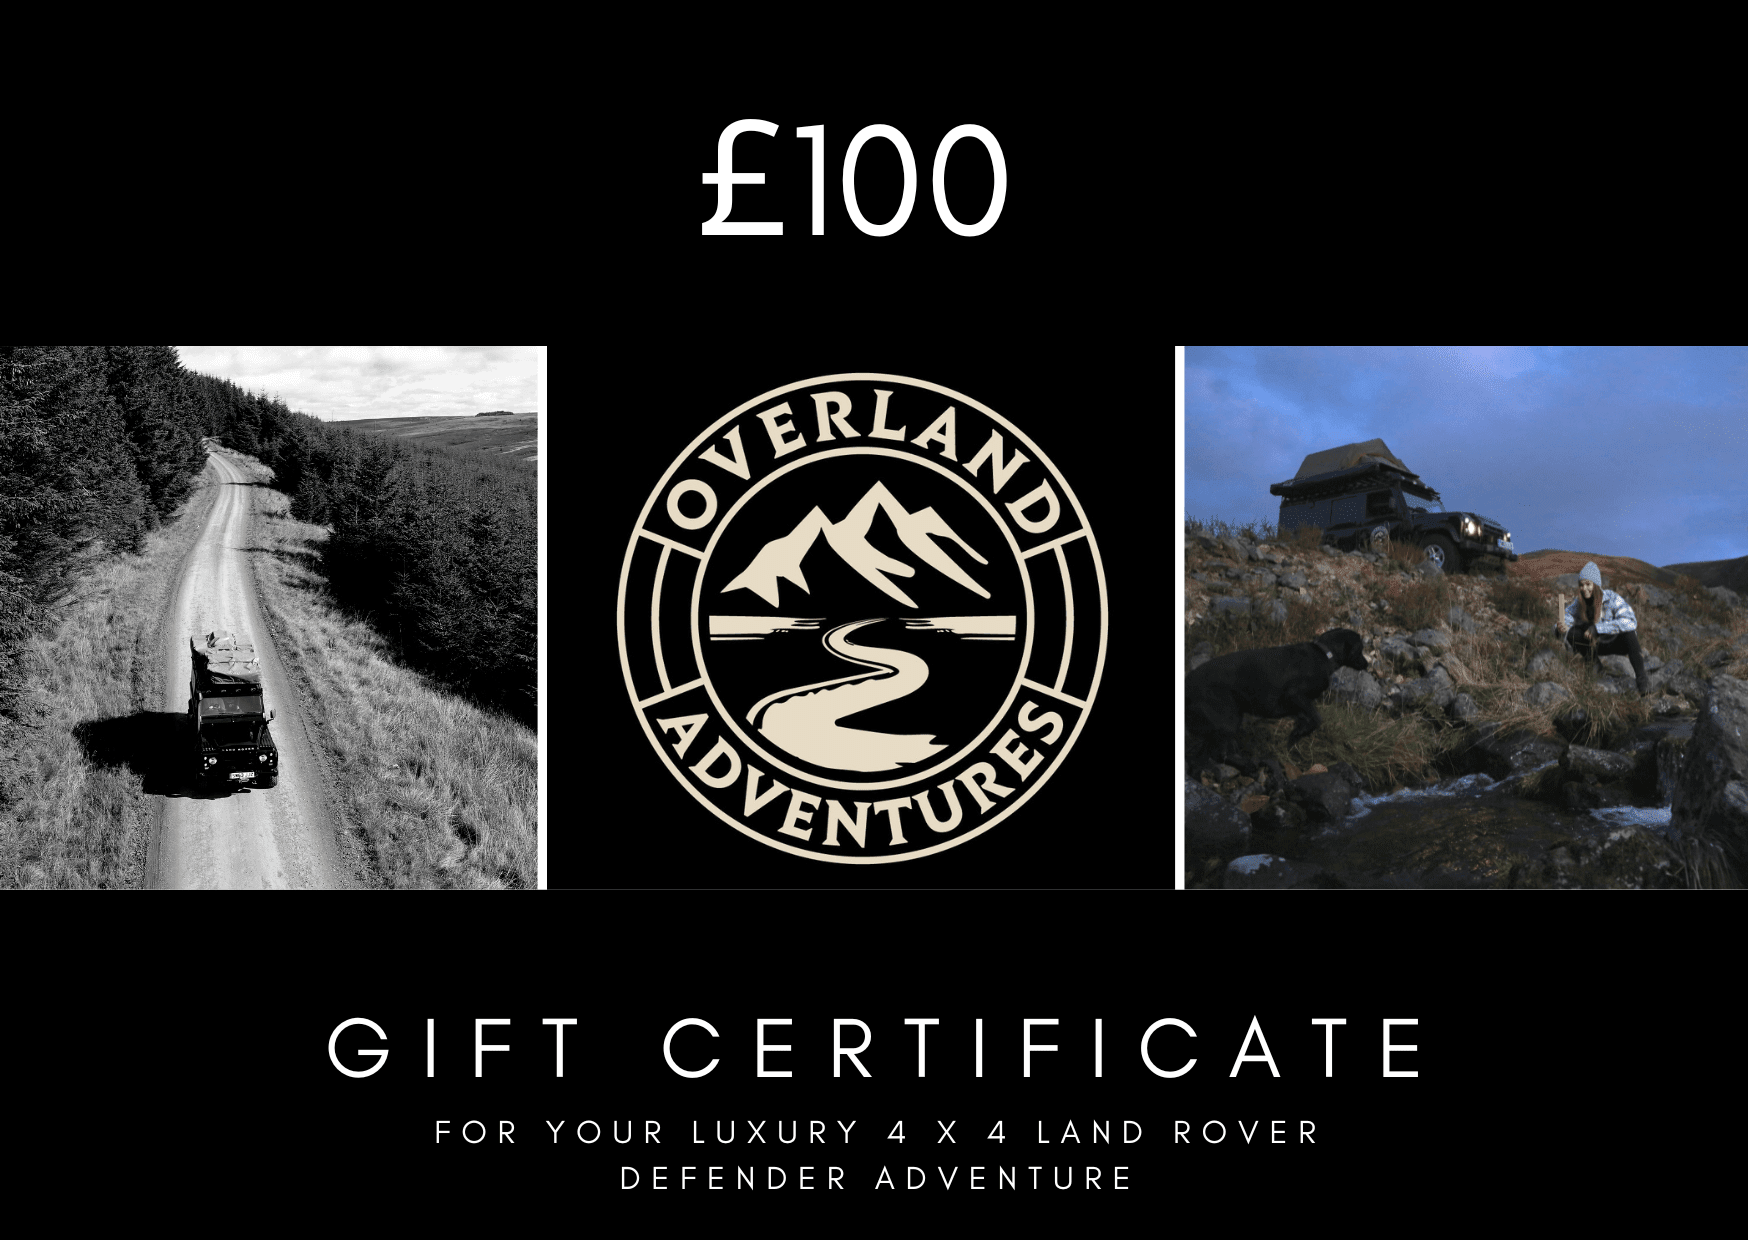 Landrover Defender Hire Northumberland £100 Gift Card